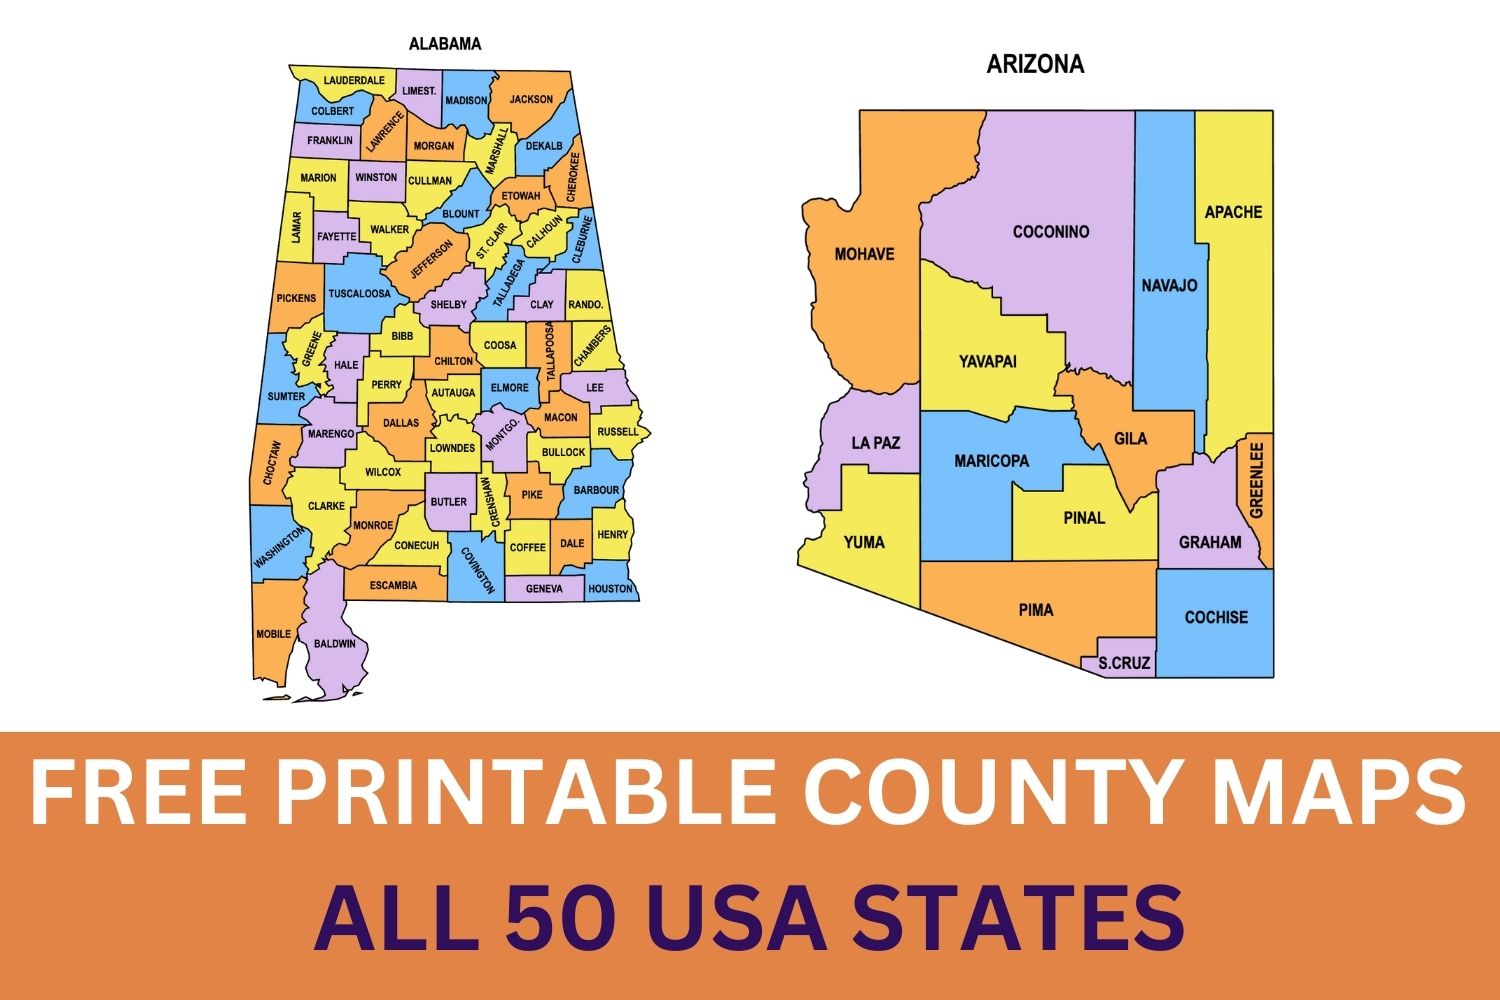 USA County Maps (Printable State Maps with County Lines), Editable,Free, Download, Colored blank county map, Multi colored couty map